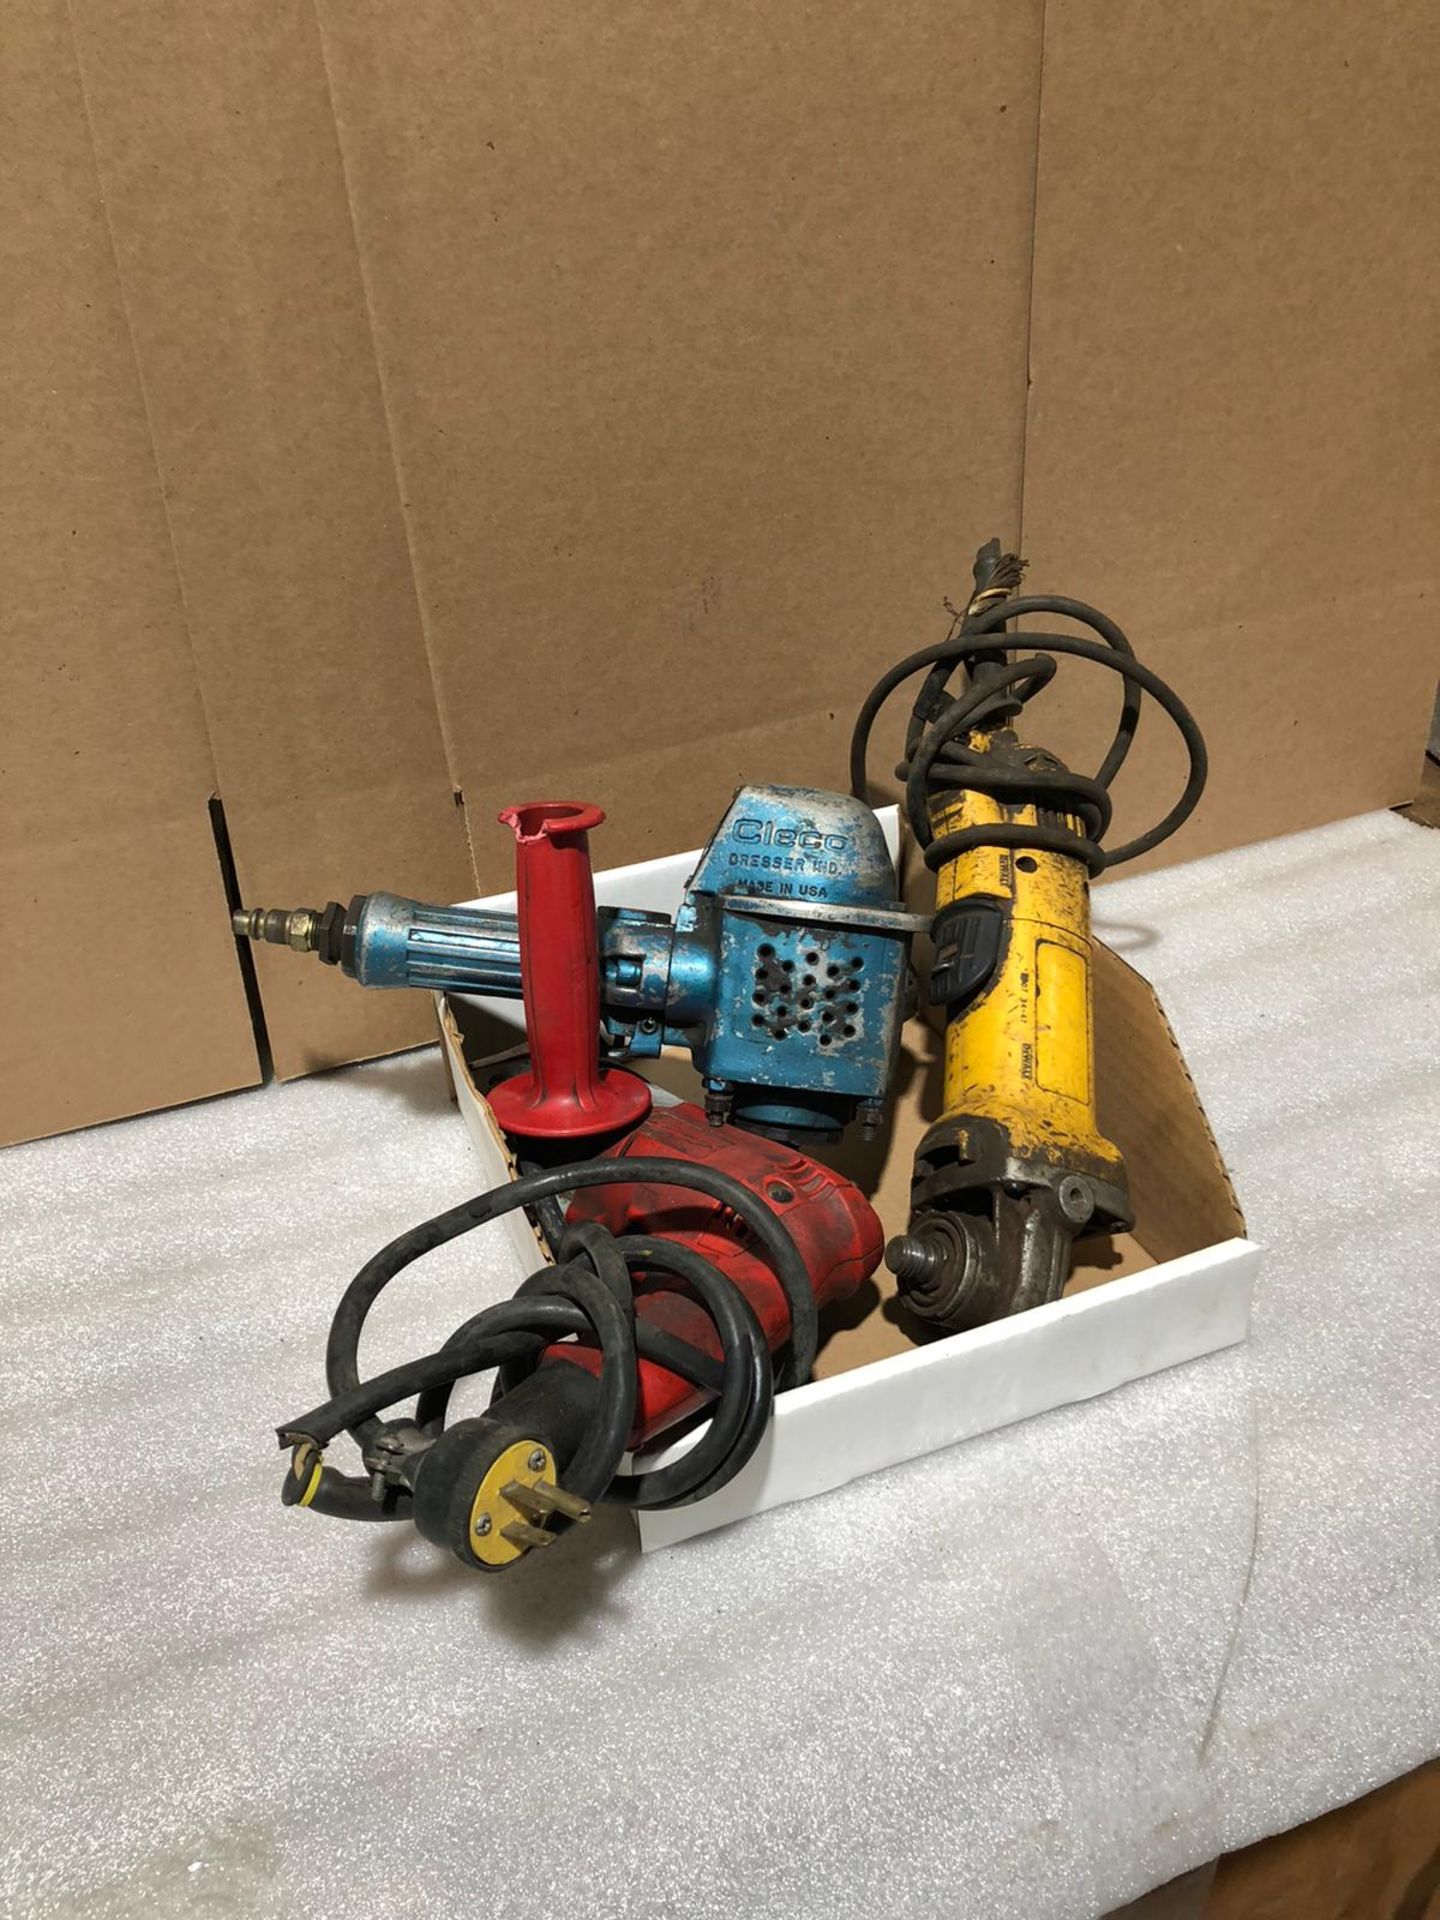 Lot of 3 (3 units) Electric and Pneumatic Hand Tools - Cleco & Dewalt Grinders